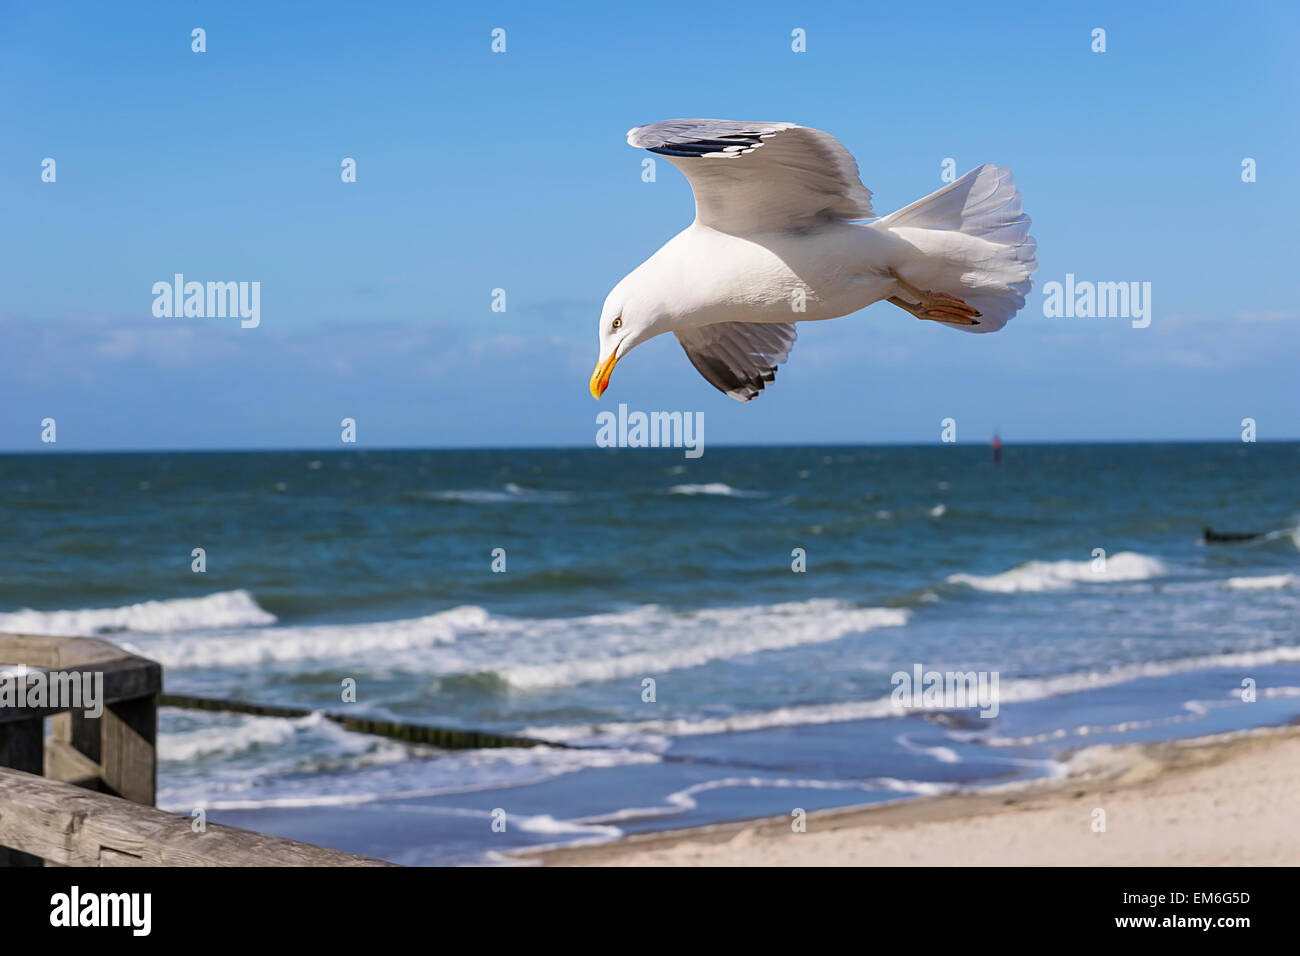 Flying seagull on the beach of the Baltic Sea in Germany Stock Photo